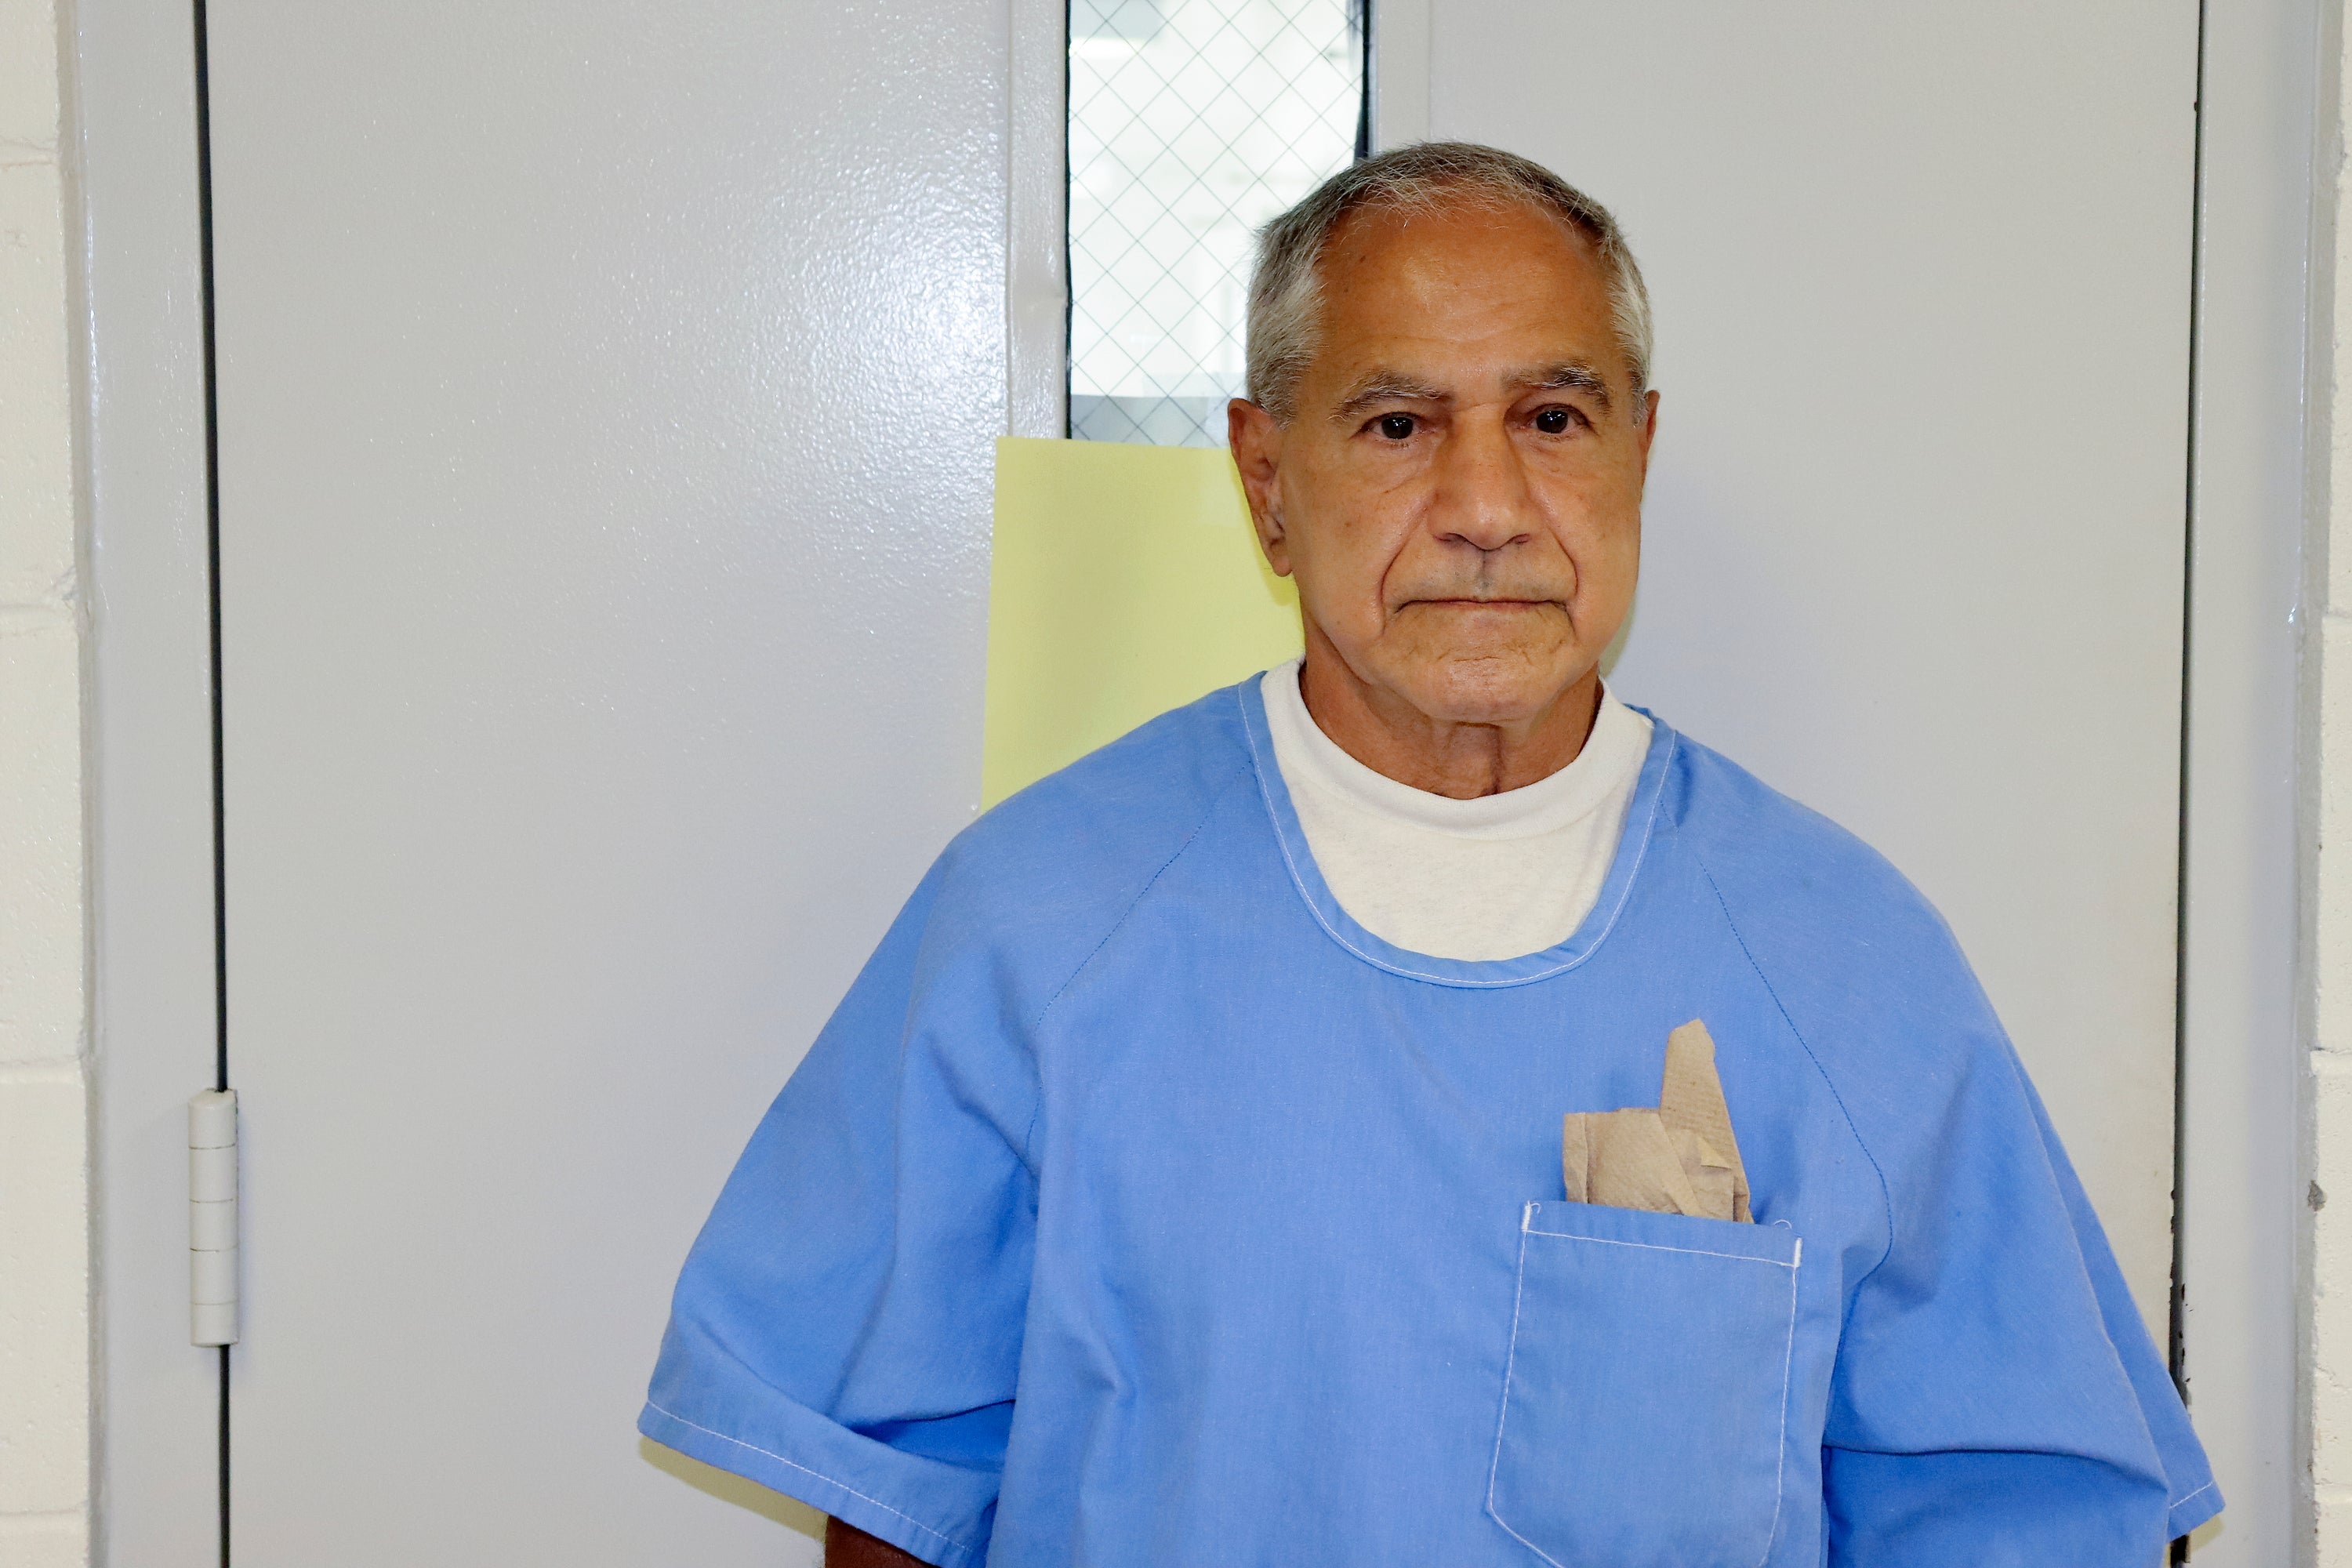 Sirhan Sirhan has had repeated parole requests turned down